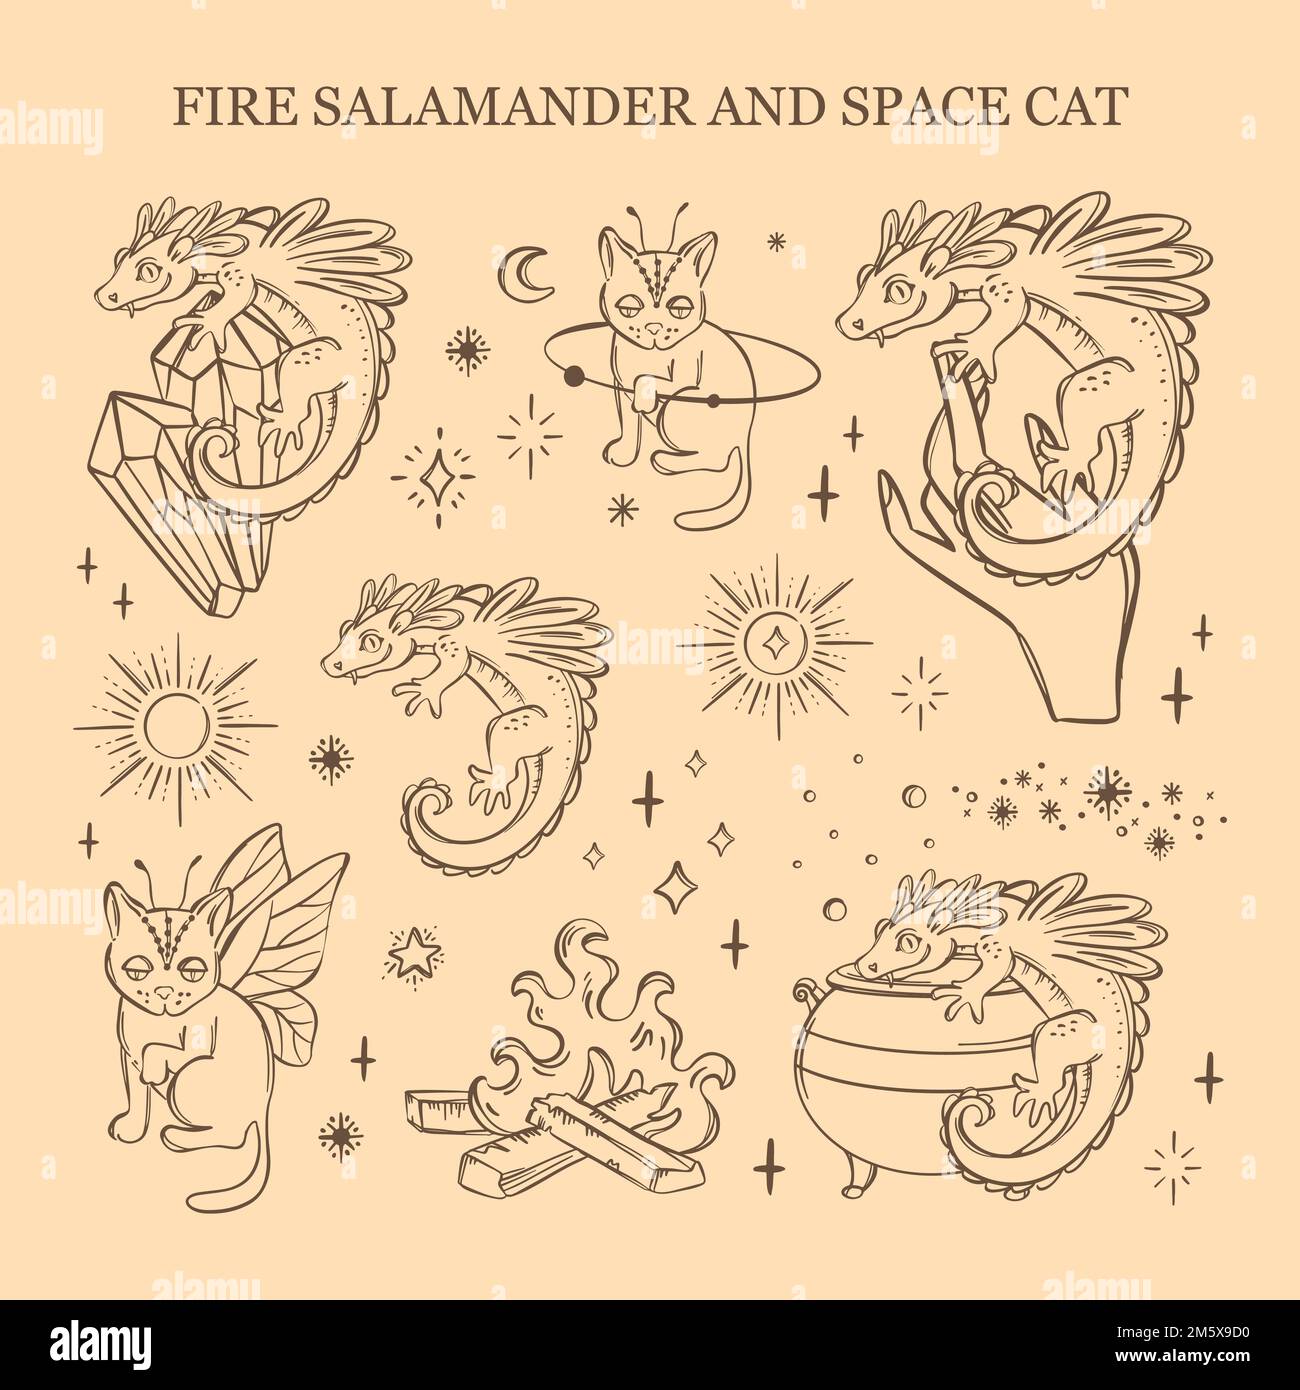 FIRE SALAMANDER AND SPACE CAT Astrological Character Variations Symbol Set Card Occult Esoteric Witchcraft Hand Drawn Alchemist Objects Sketch Design Stock Vector